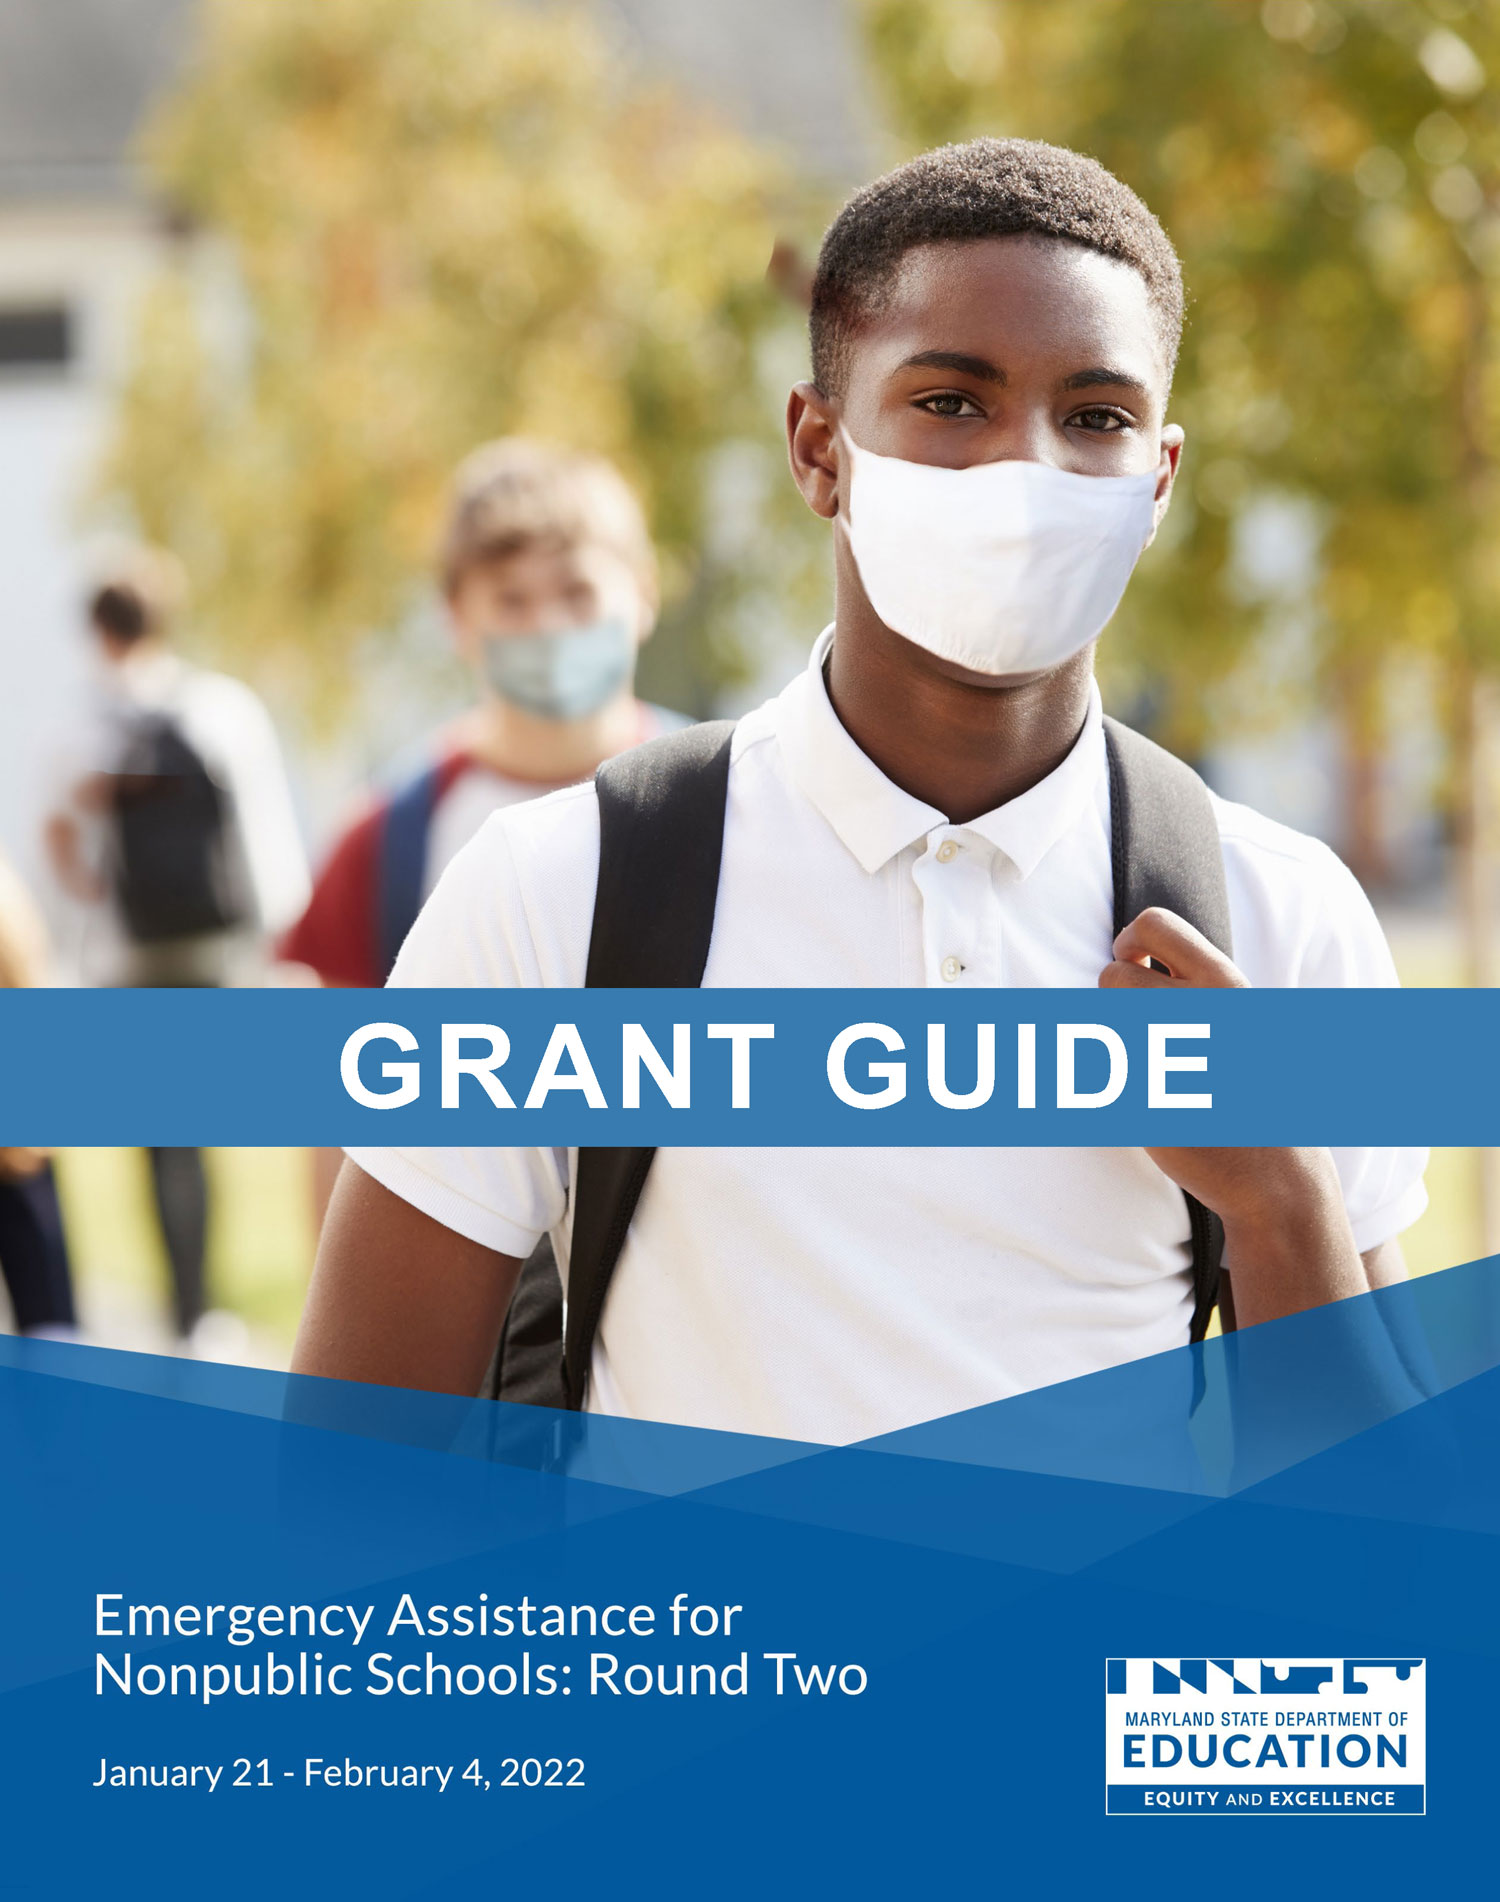 Emergency Assistance for Nonpublic Schools: Round Two Grant Guide